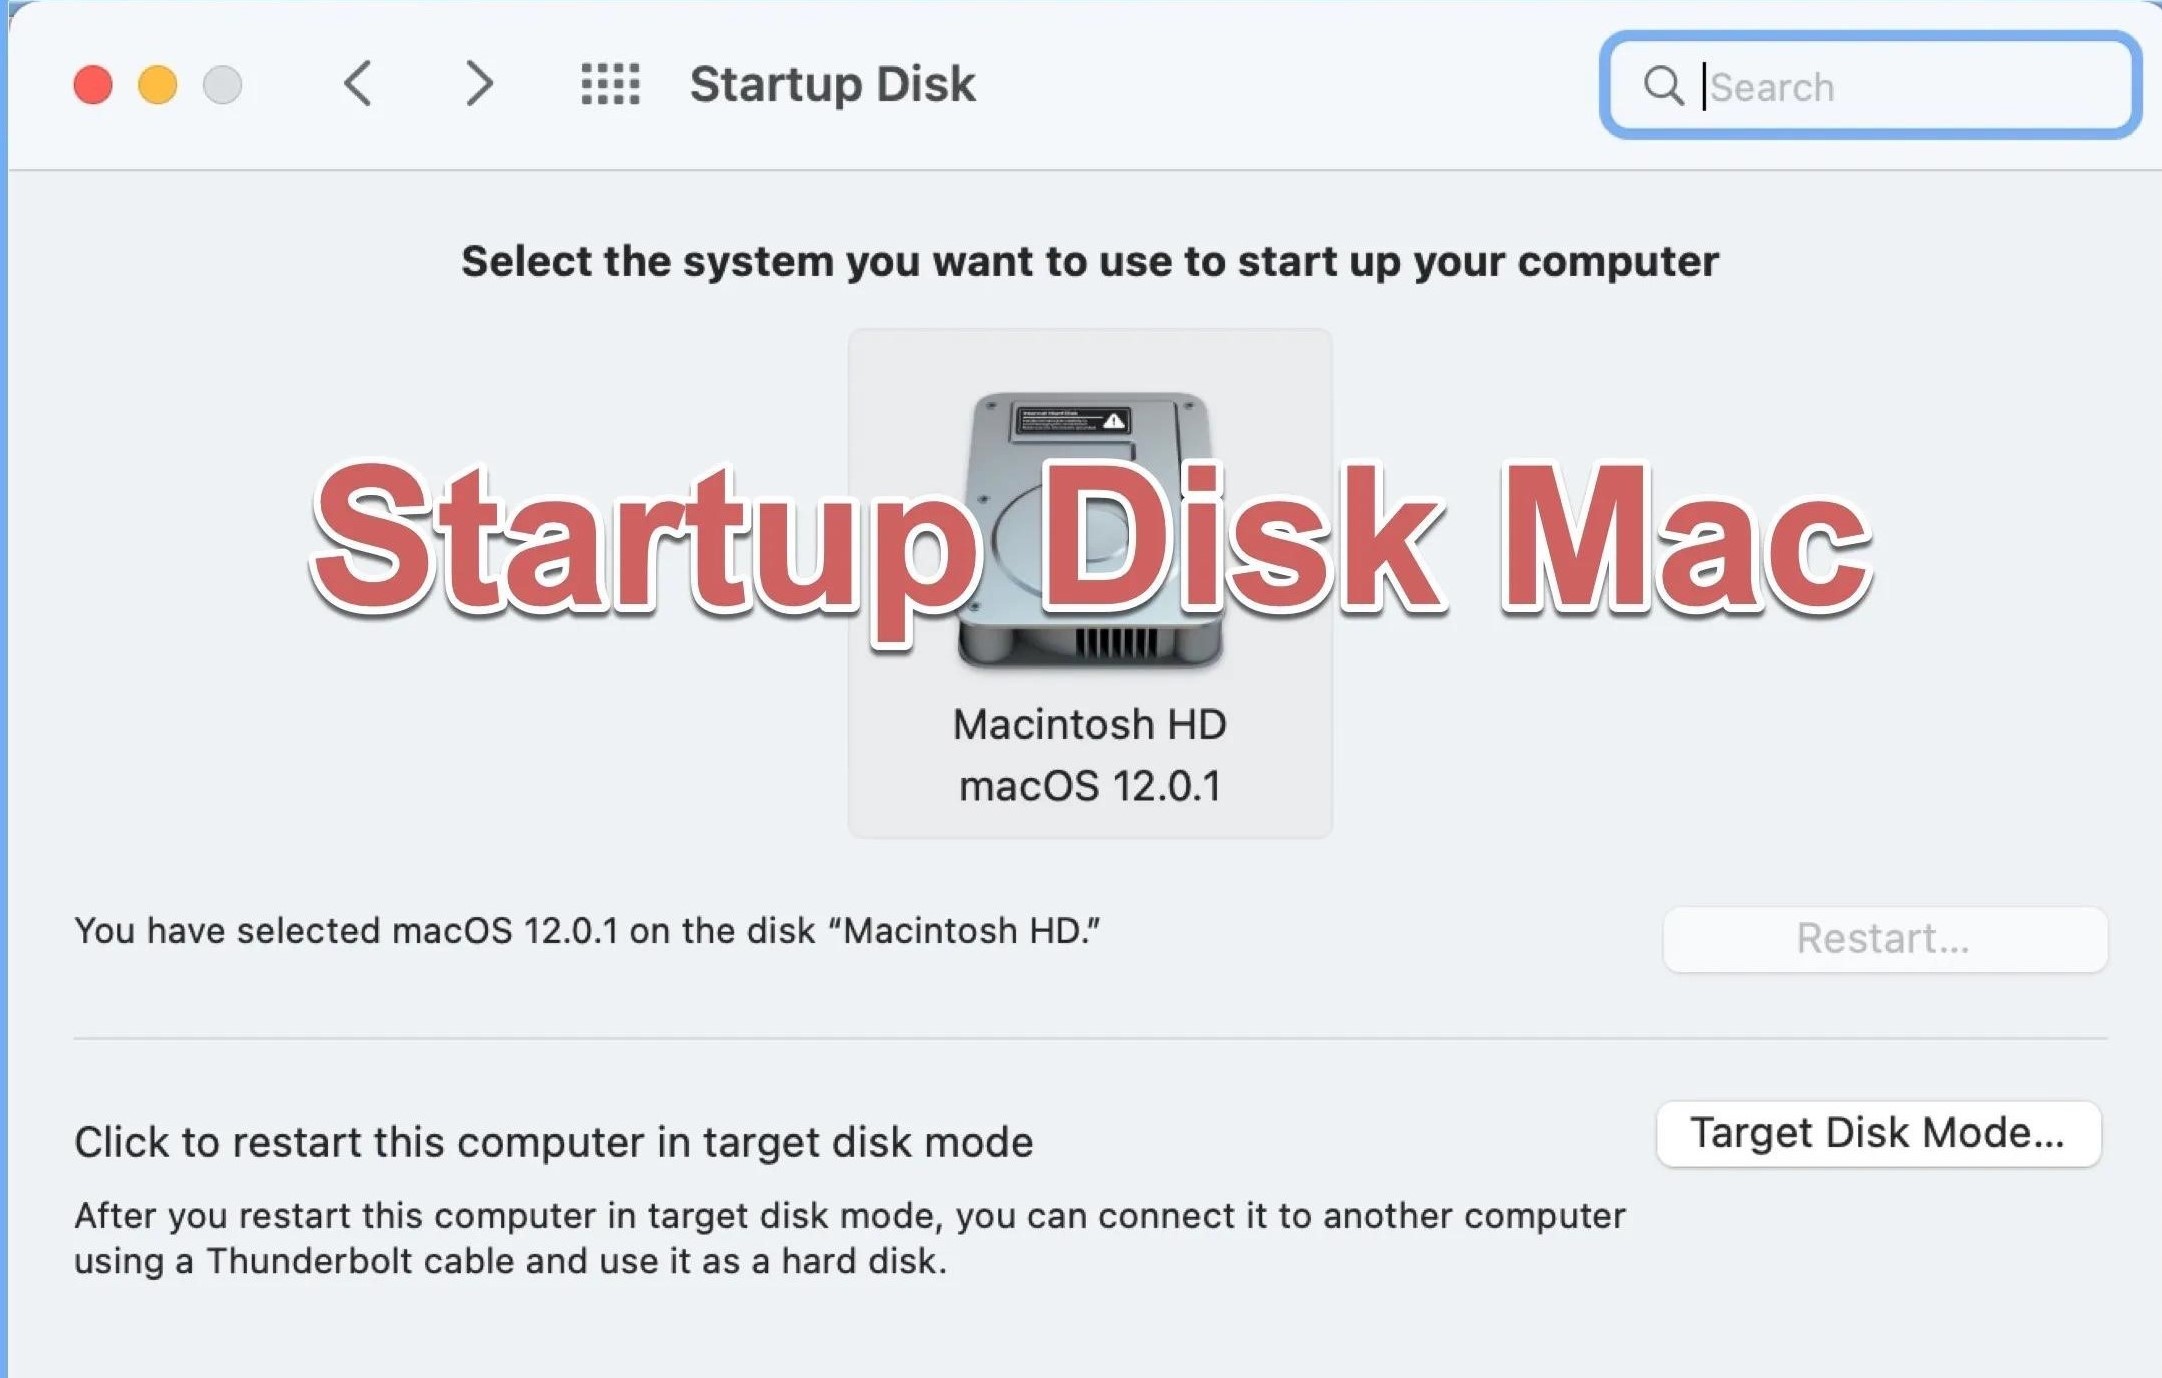 Back Up Your Startup Disk Using Disk Utility